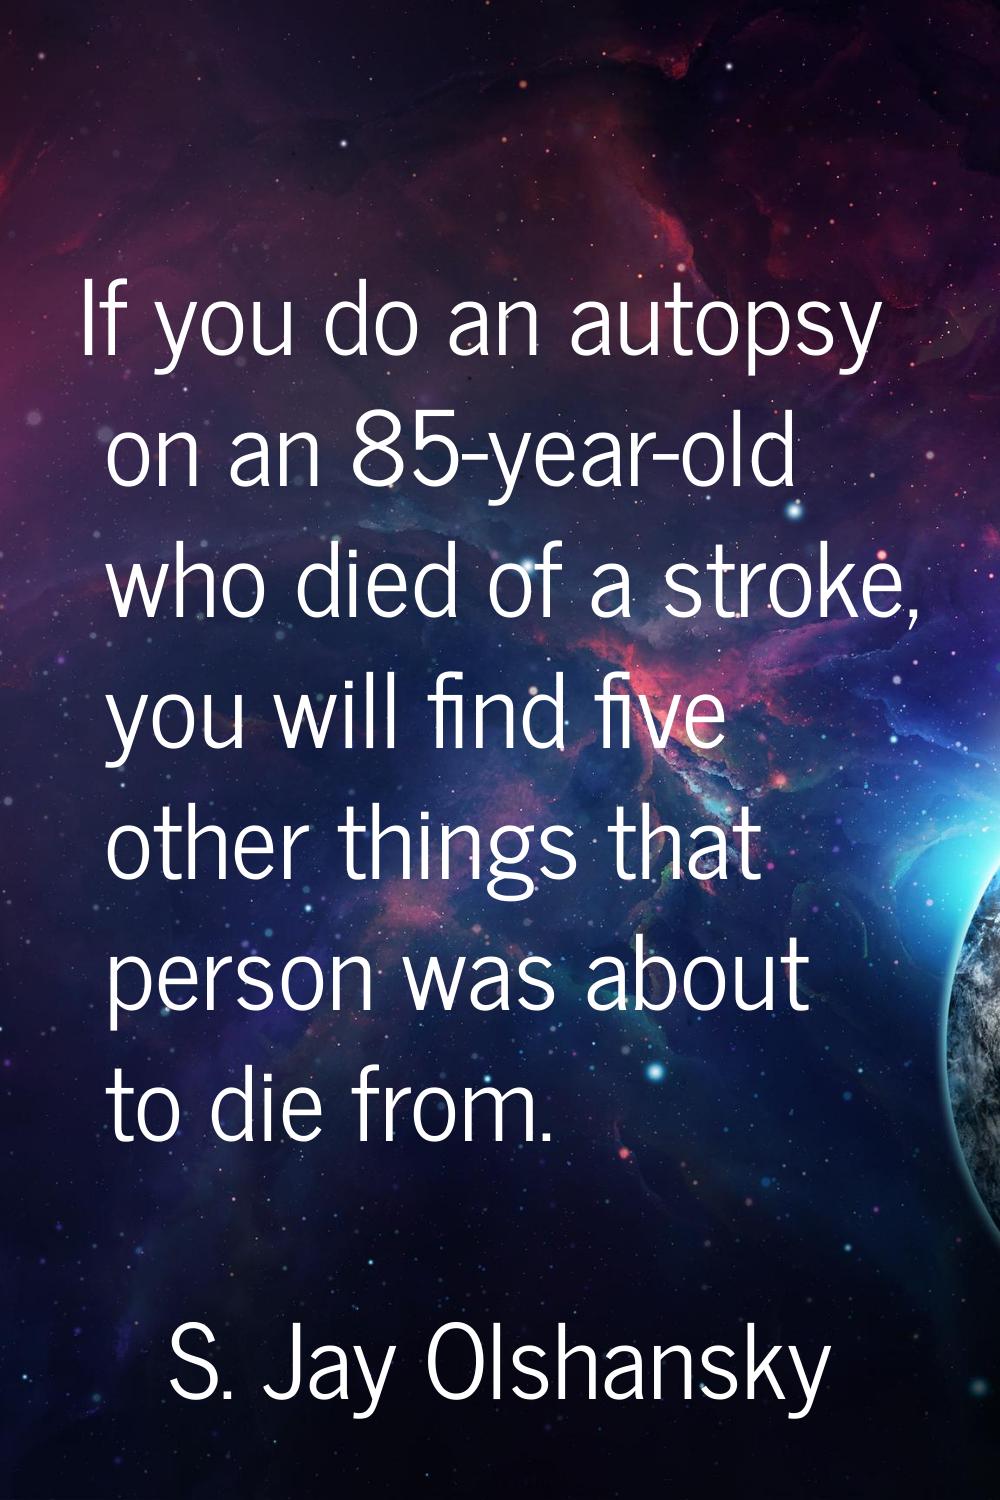 If you do an autopsy on an 85-year-old who died of a stroke, you will find five other things that p